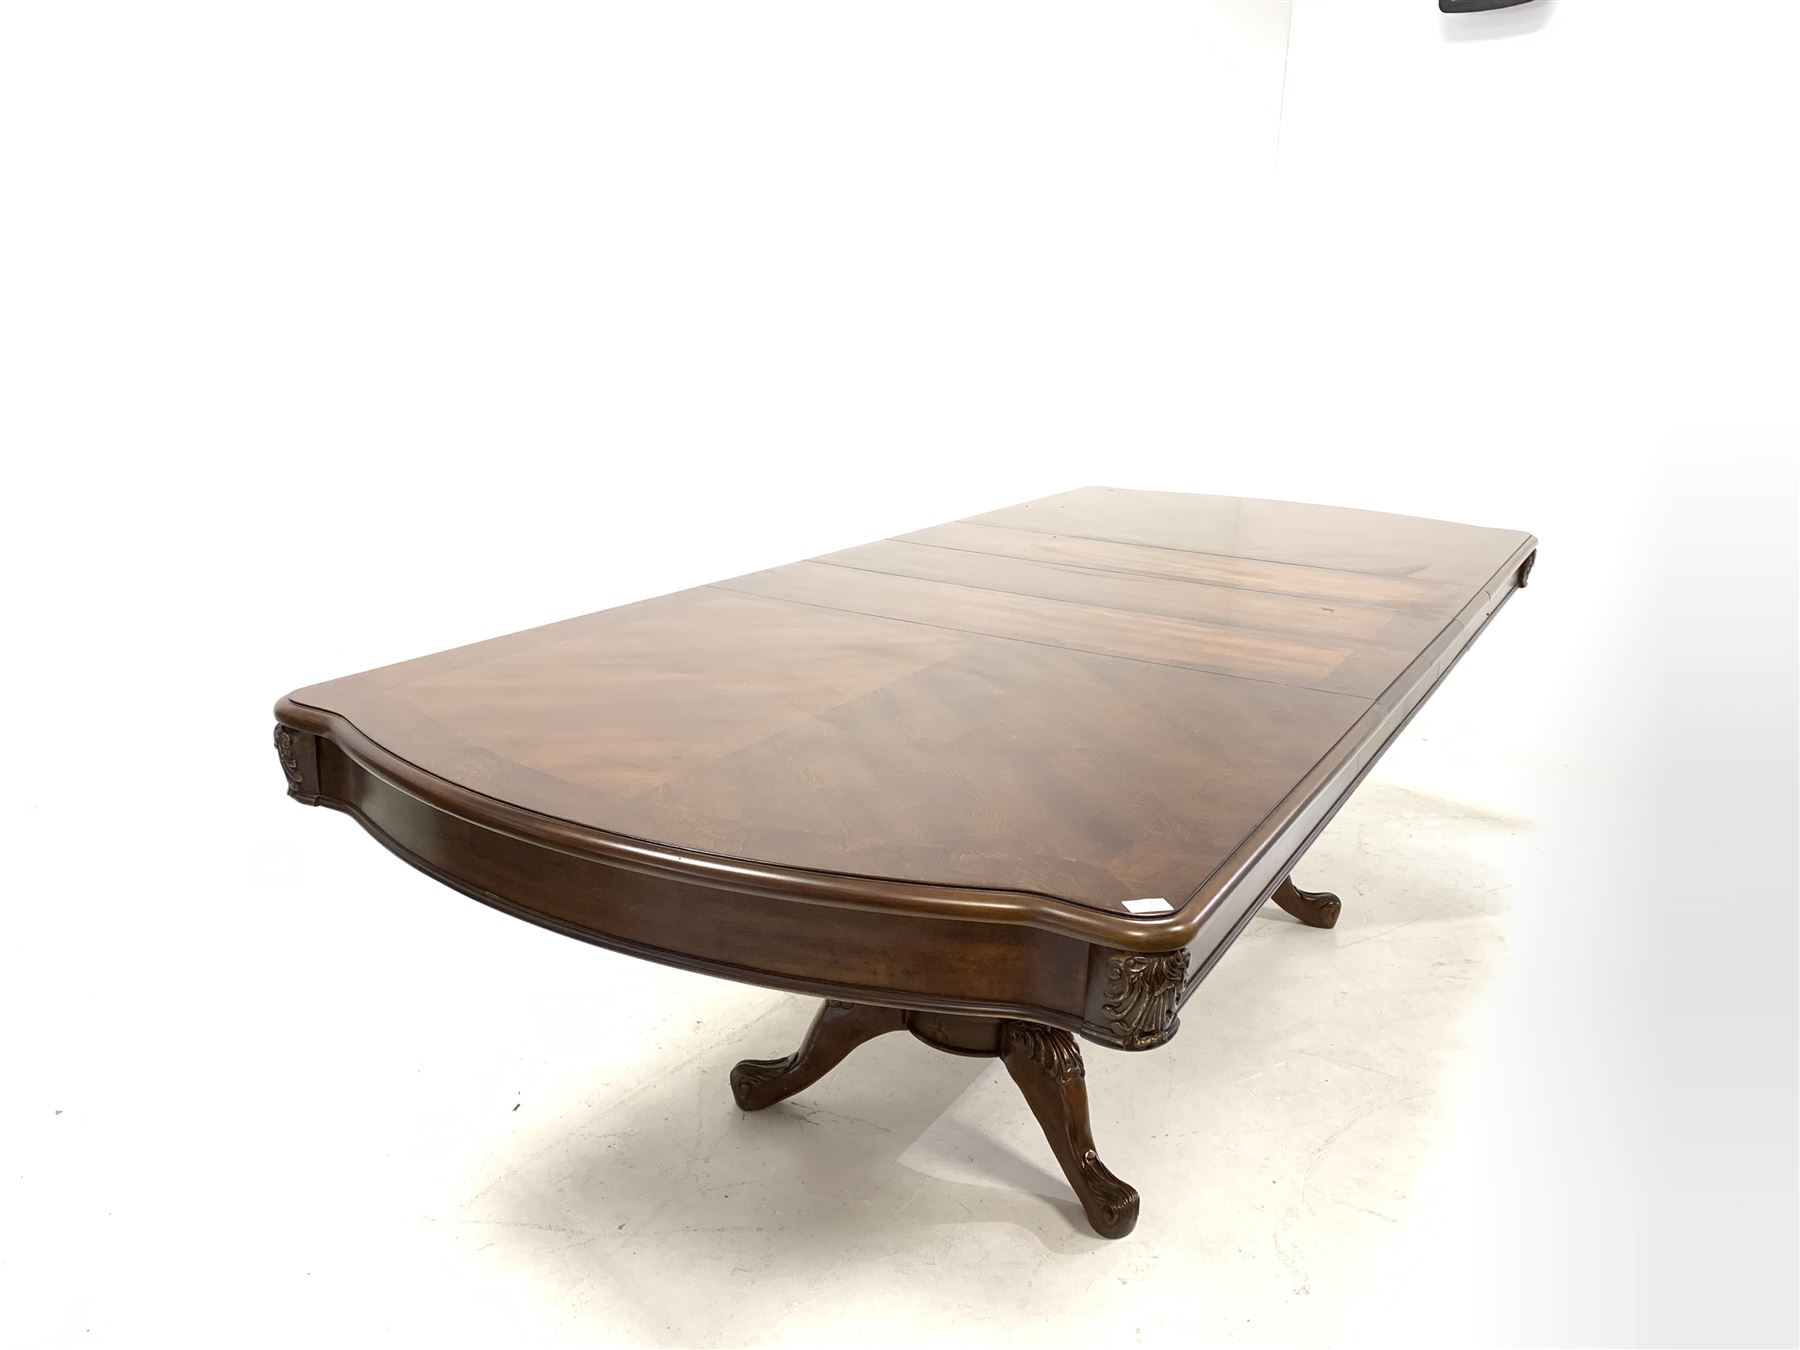 Late 20th century rectangular walnut double pedestal extending dining table - Image 2 of 2